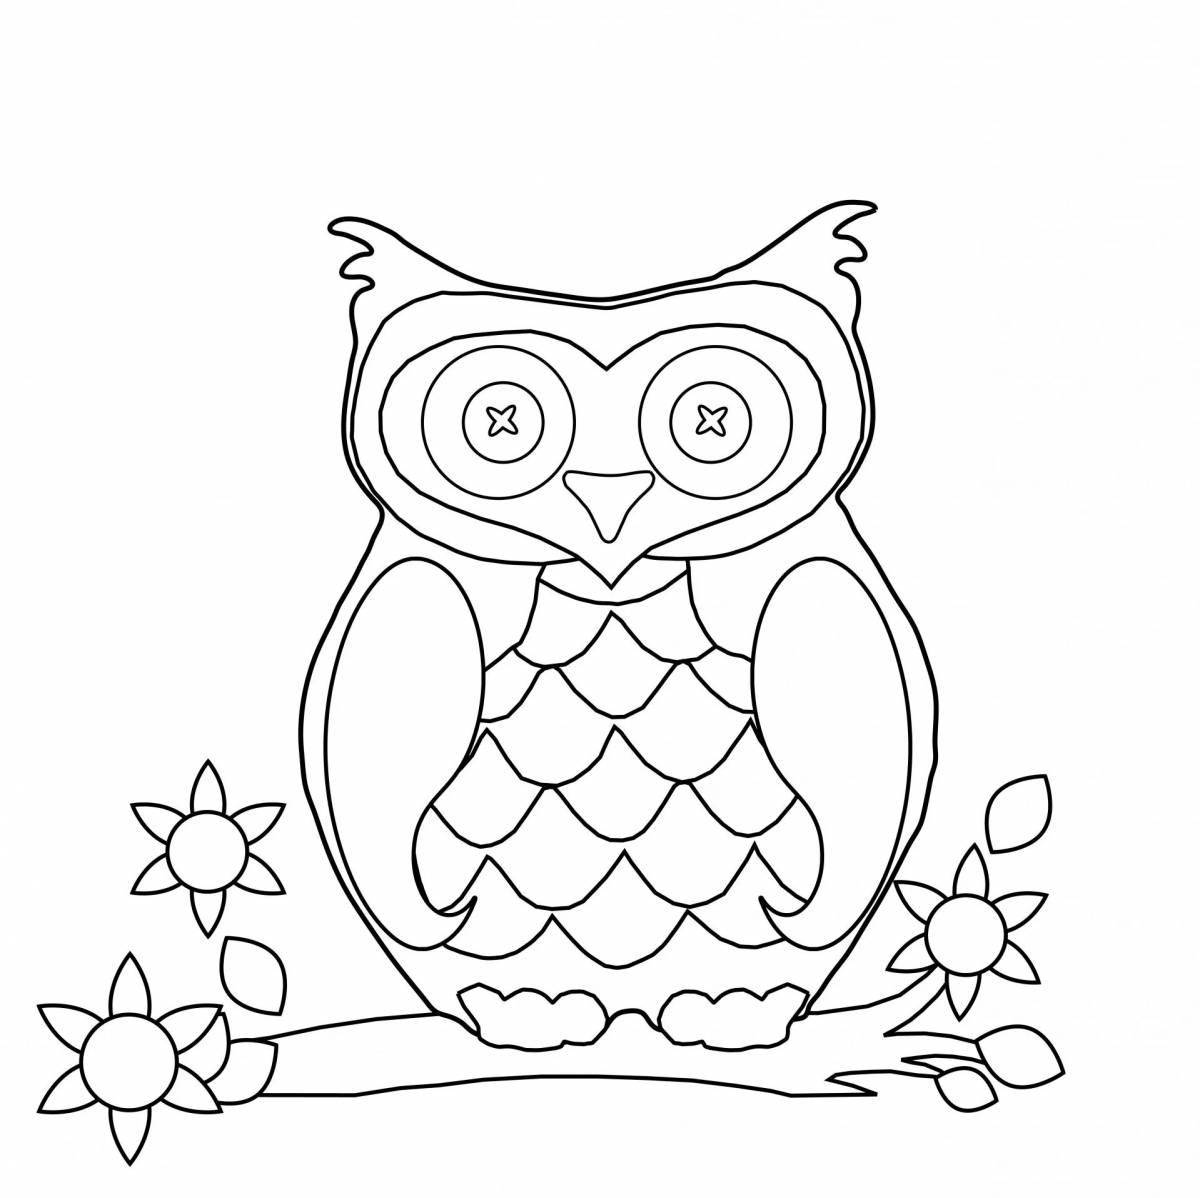 Adorable coloring book for beginners